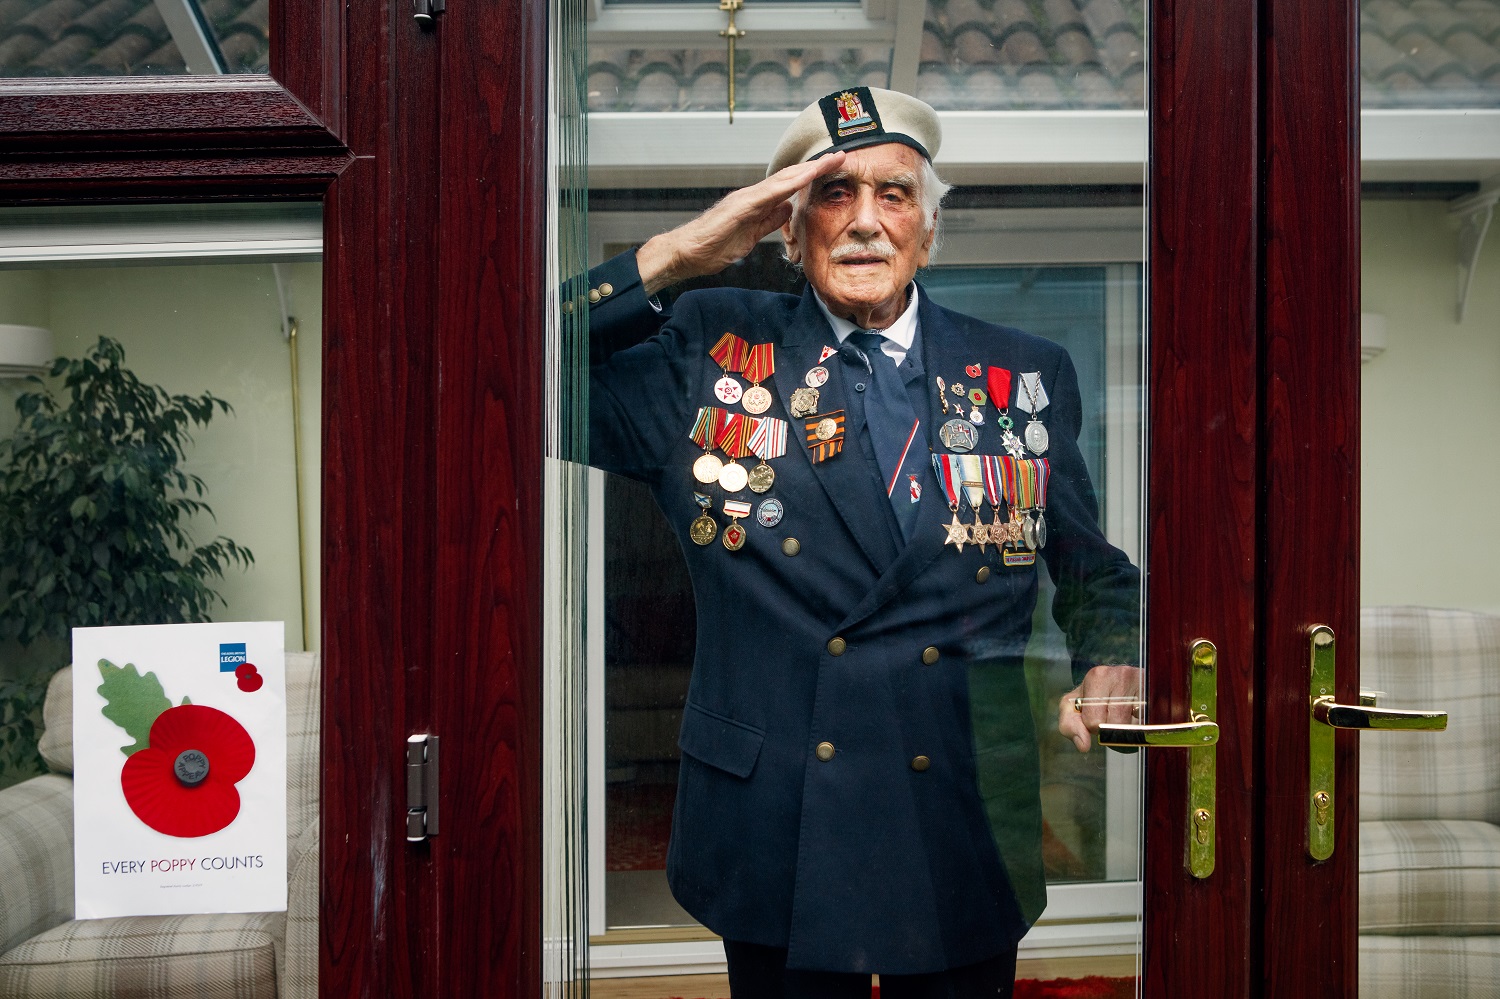 Bill Taylor saluting behind a window wearing his medals